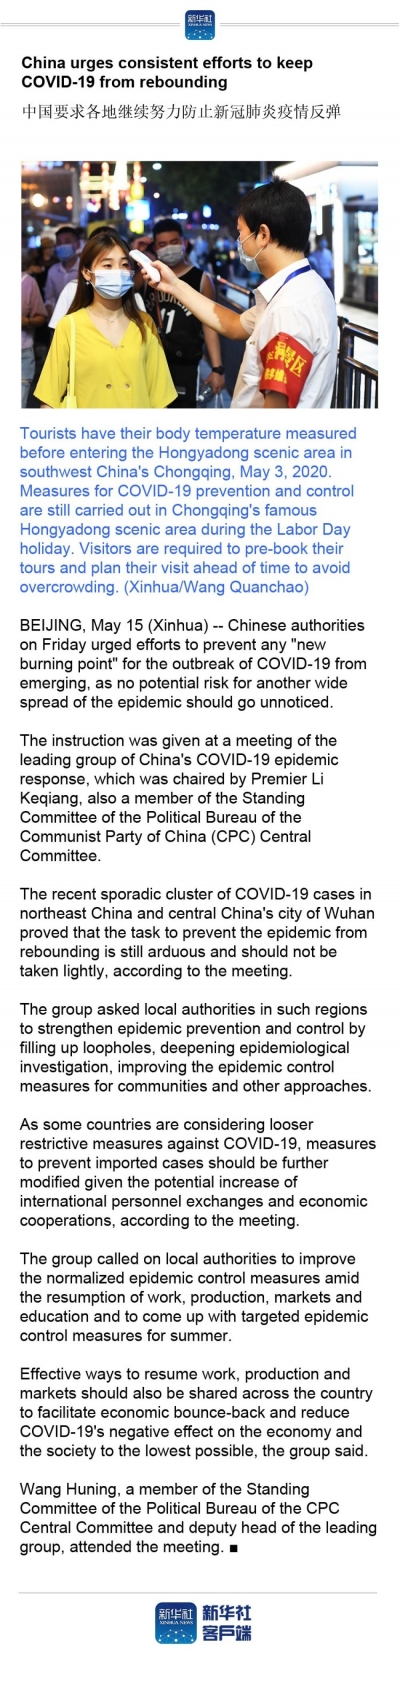 China urges consistent efforts to keep COVID-19 from rebounding